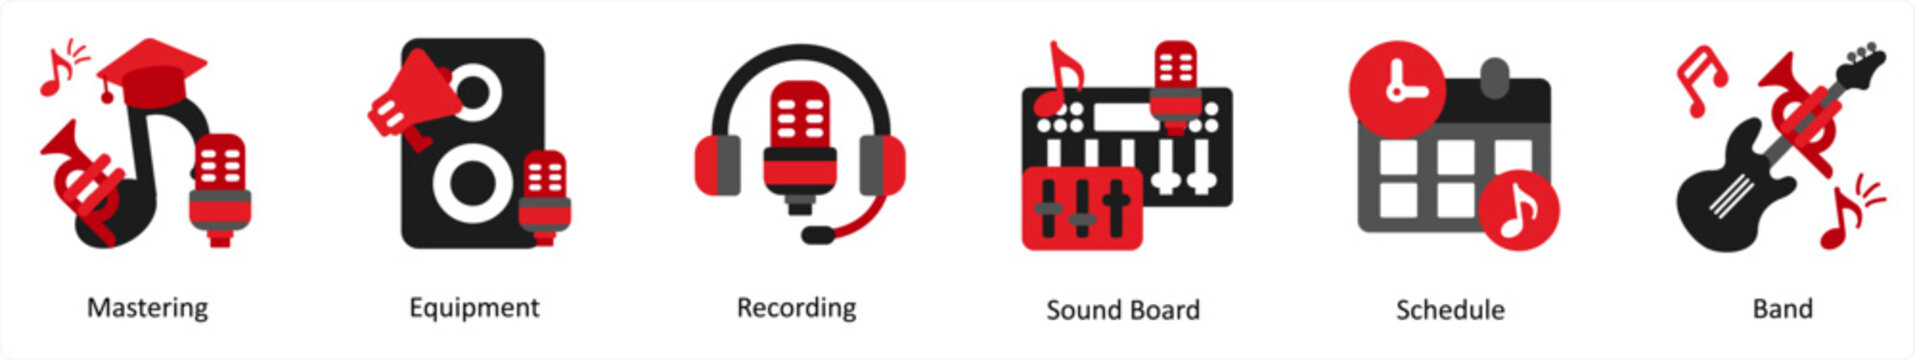 Six music icons in red and black as mastering, equipment, recording